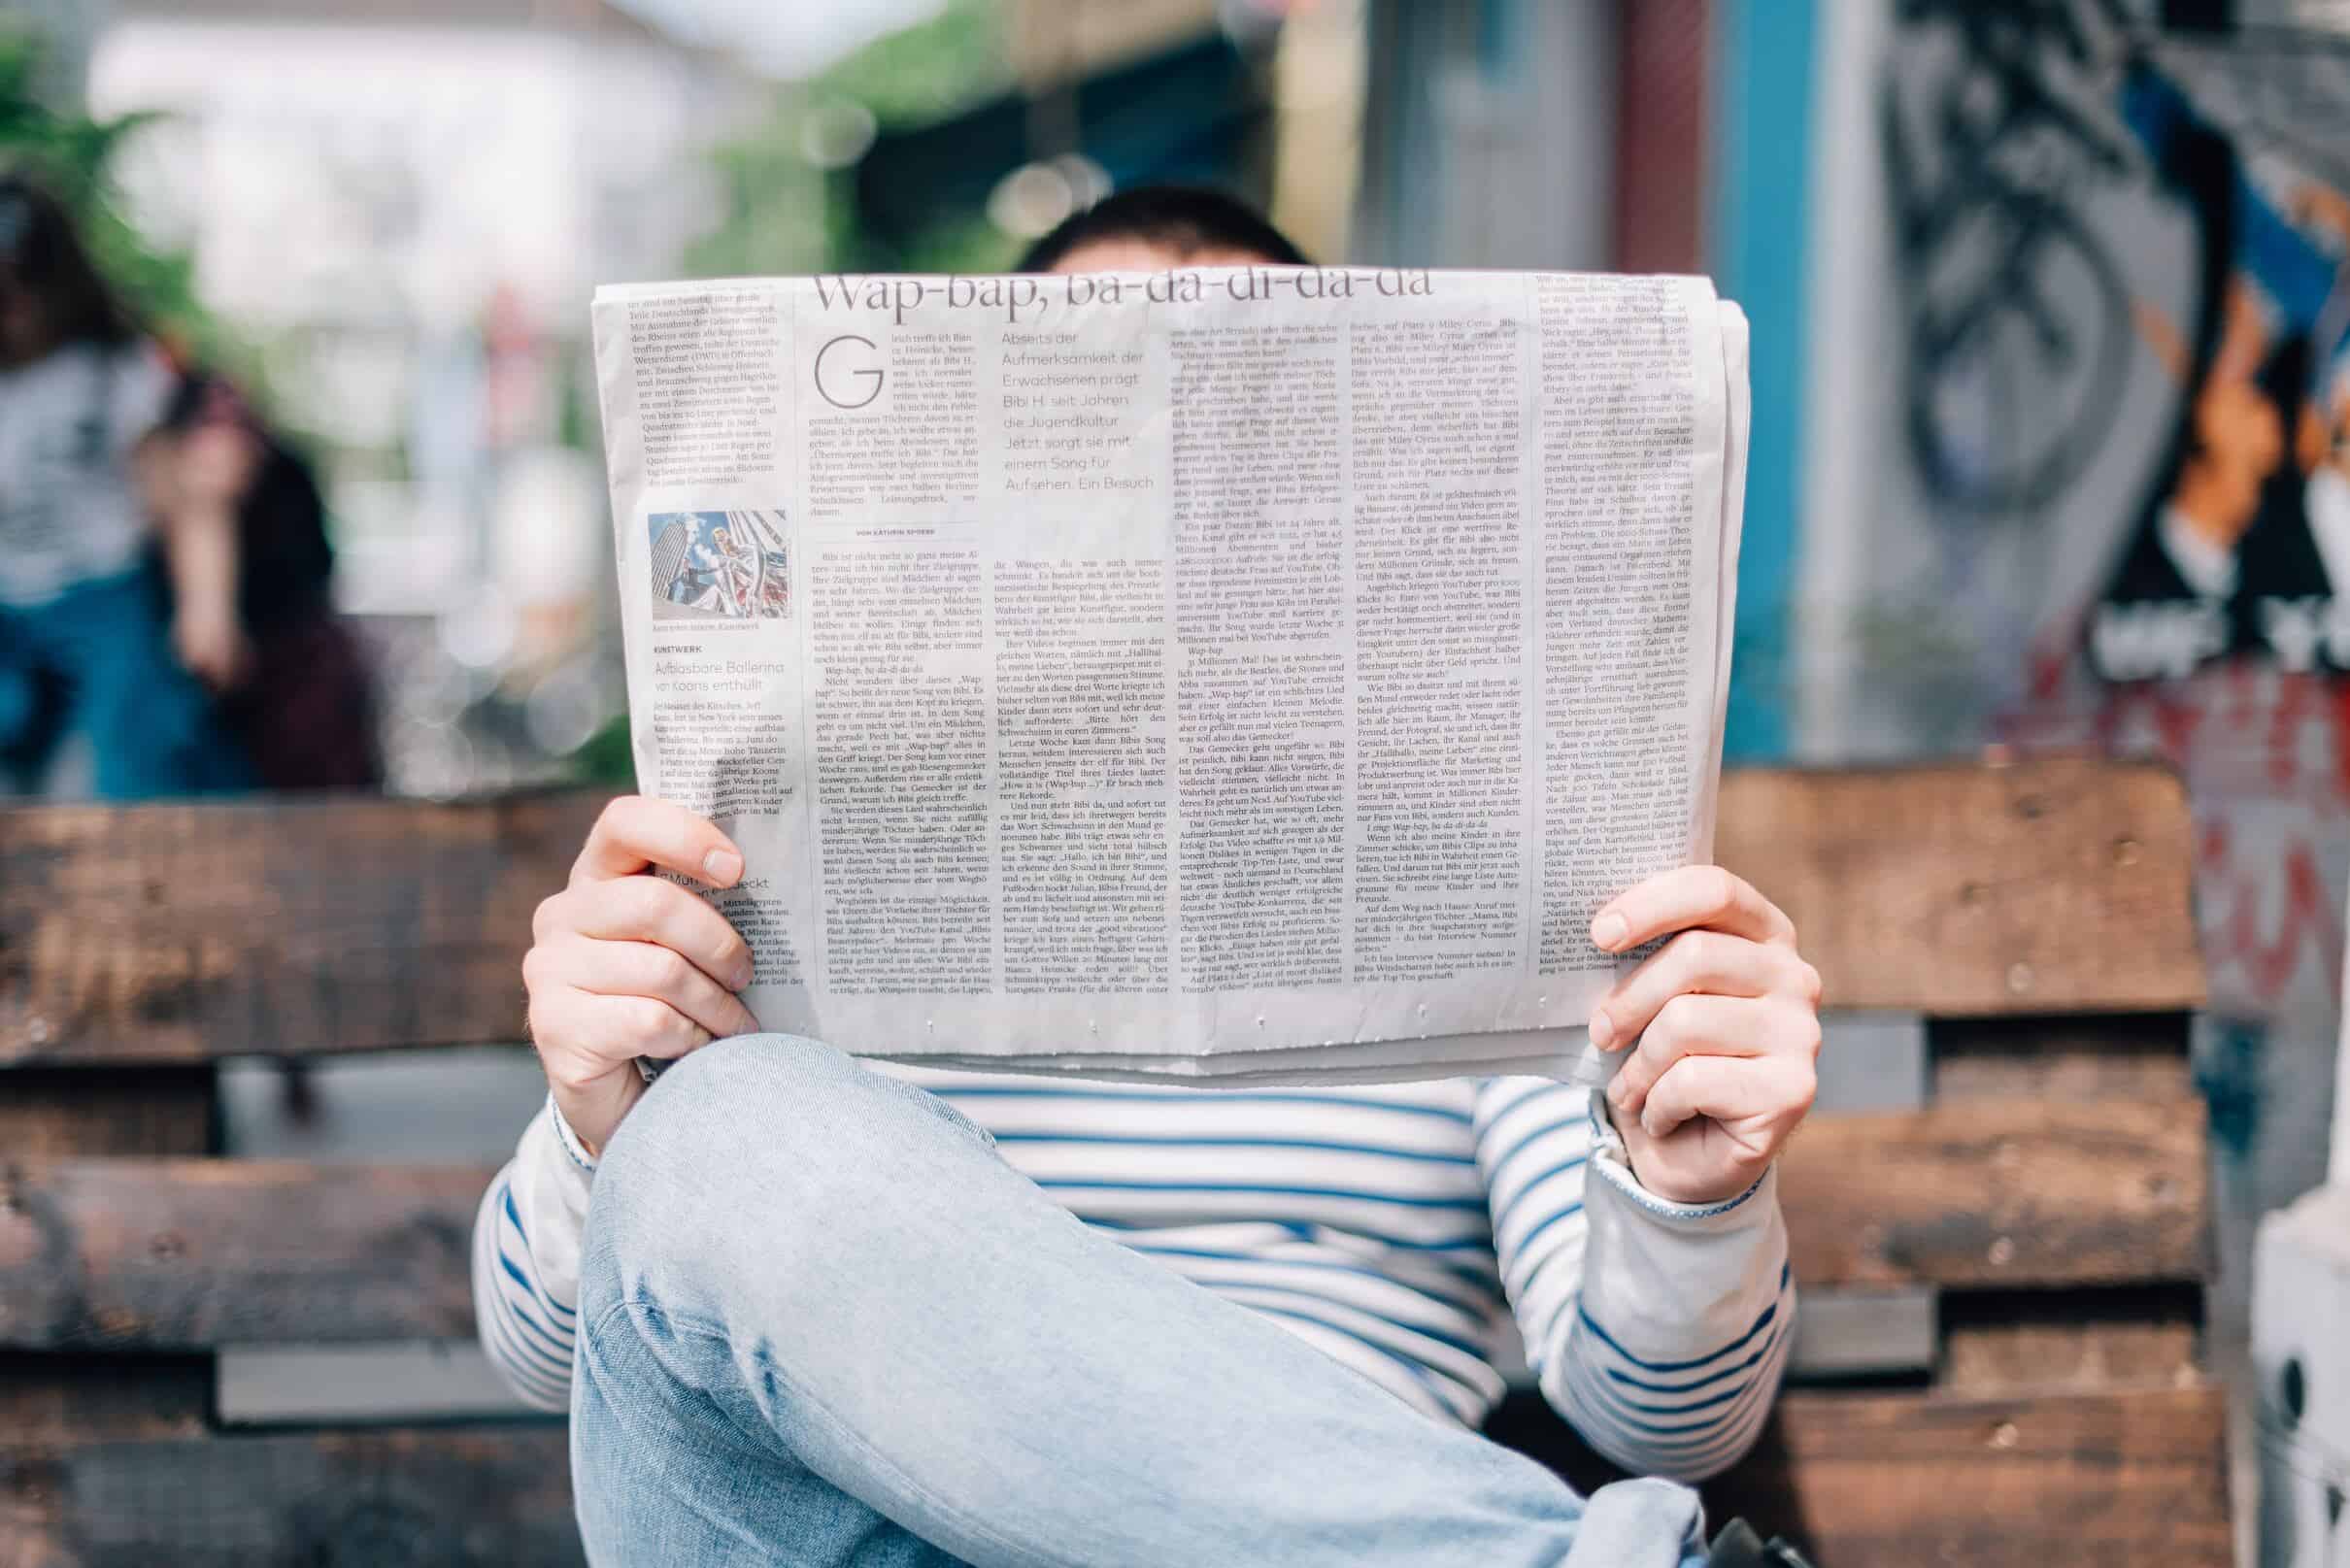 A person reading a newspaper, absorbed in its contents while seated in a relaxed posture, showcasing the pleasure of staying informed through print media.